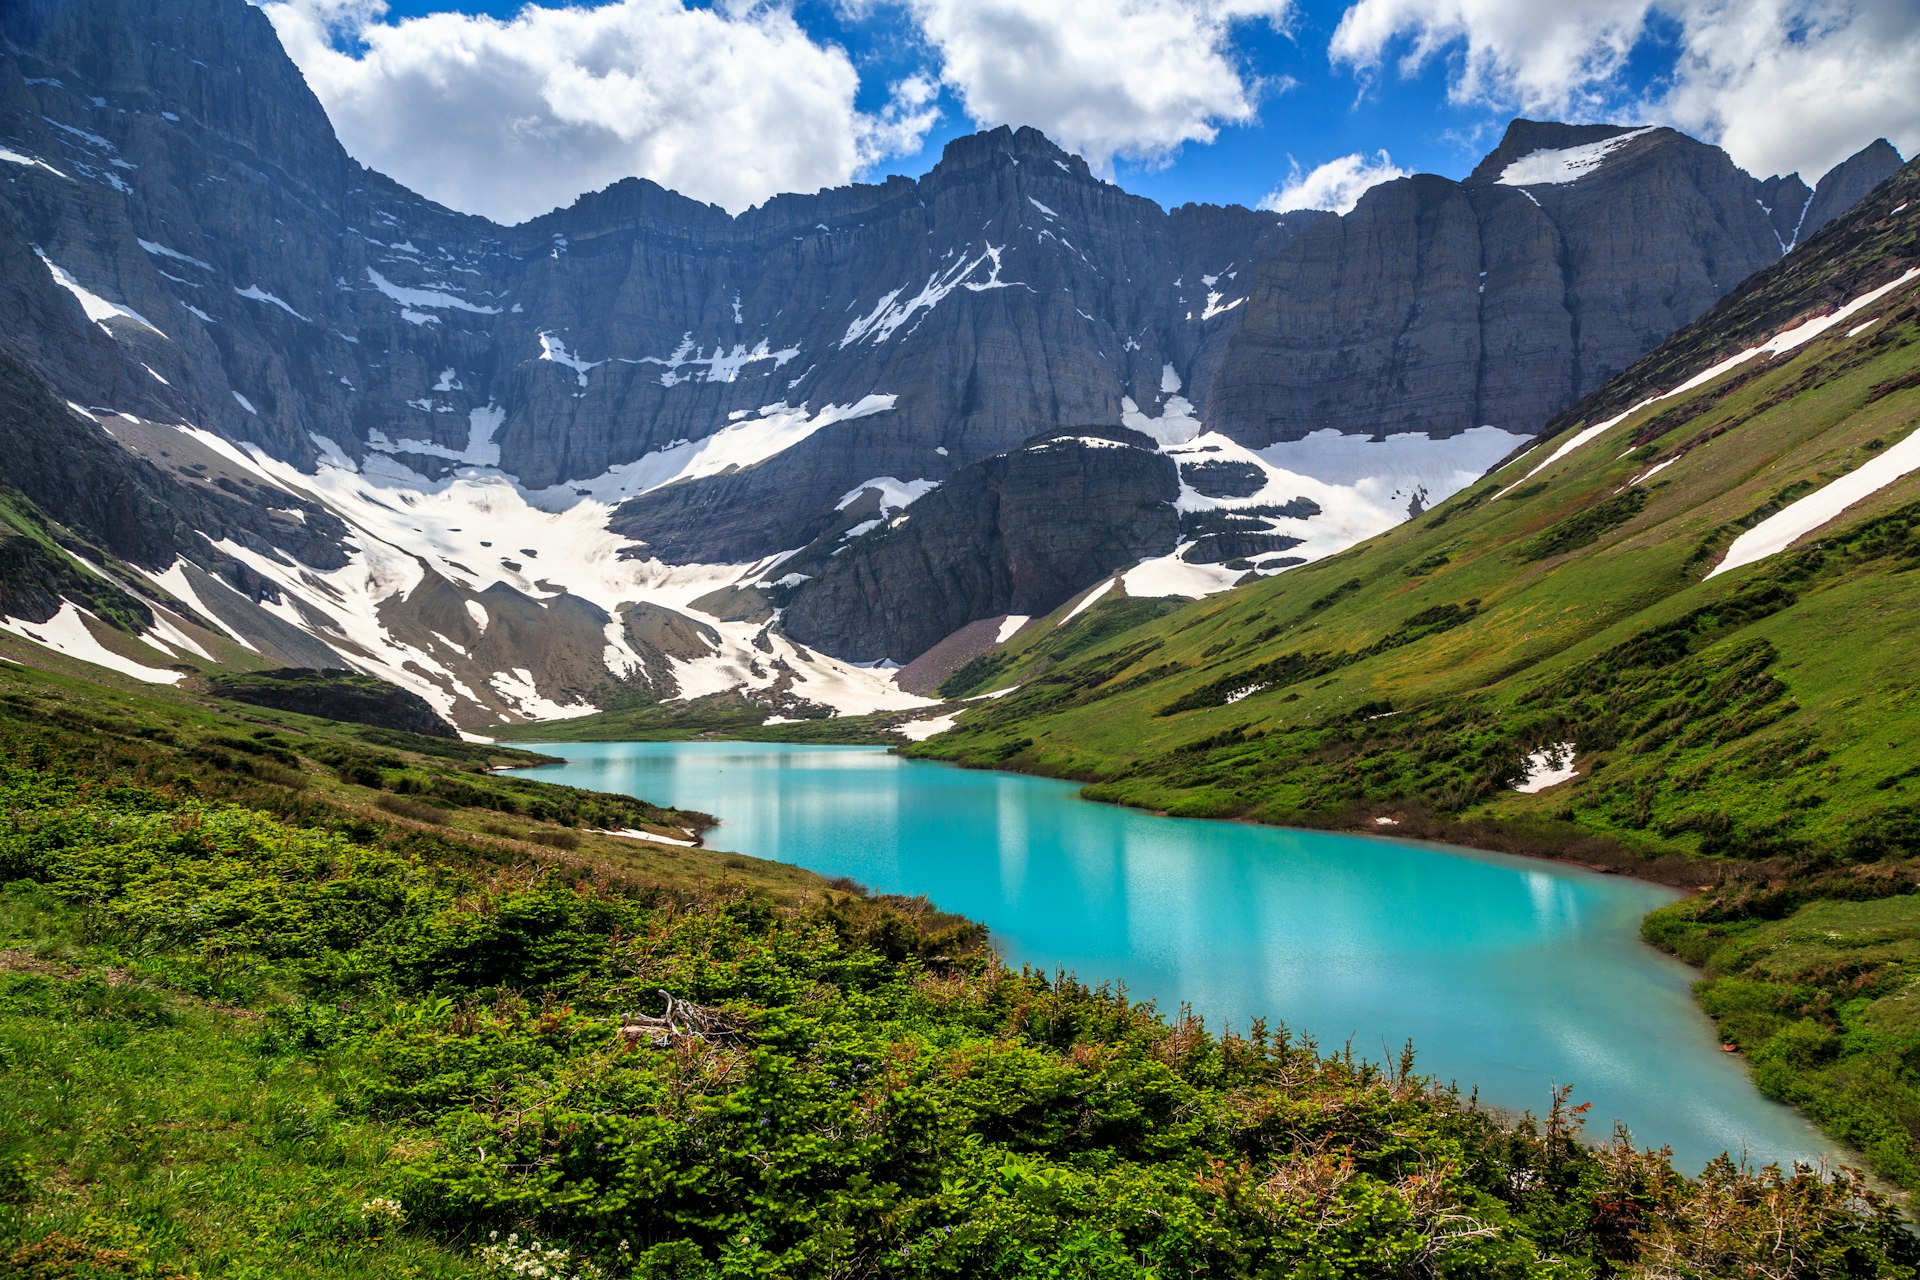 A turquoise lake surrounded by green hills and mountains with patches of snow on them